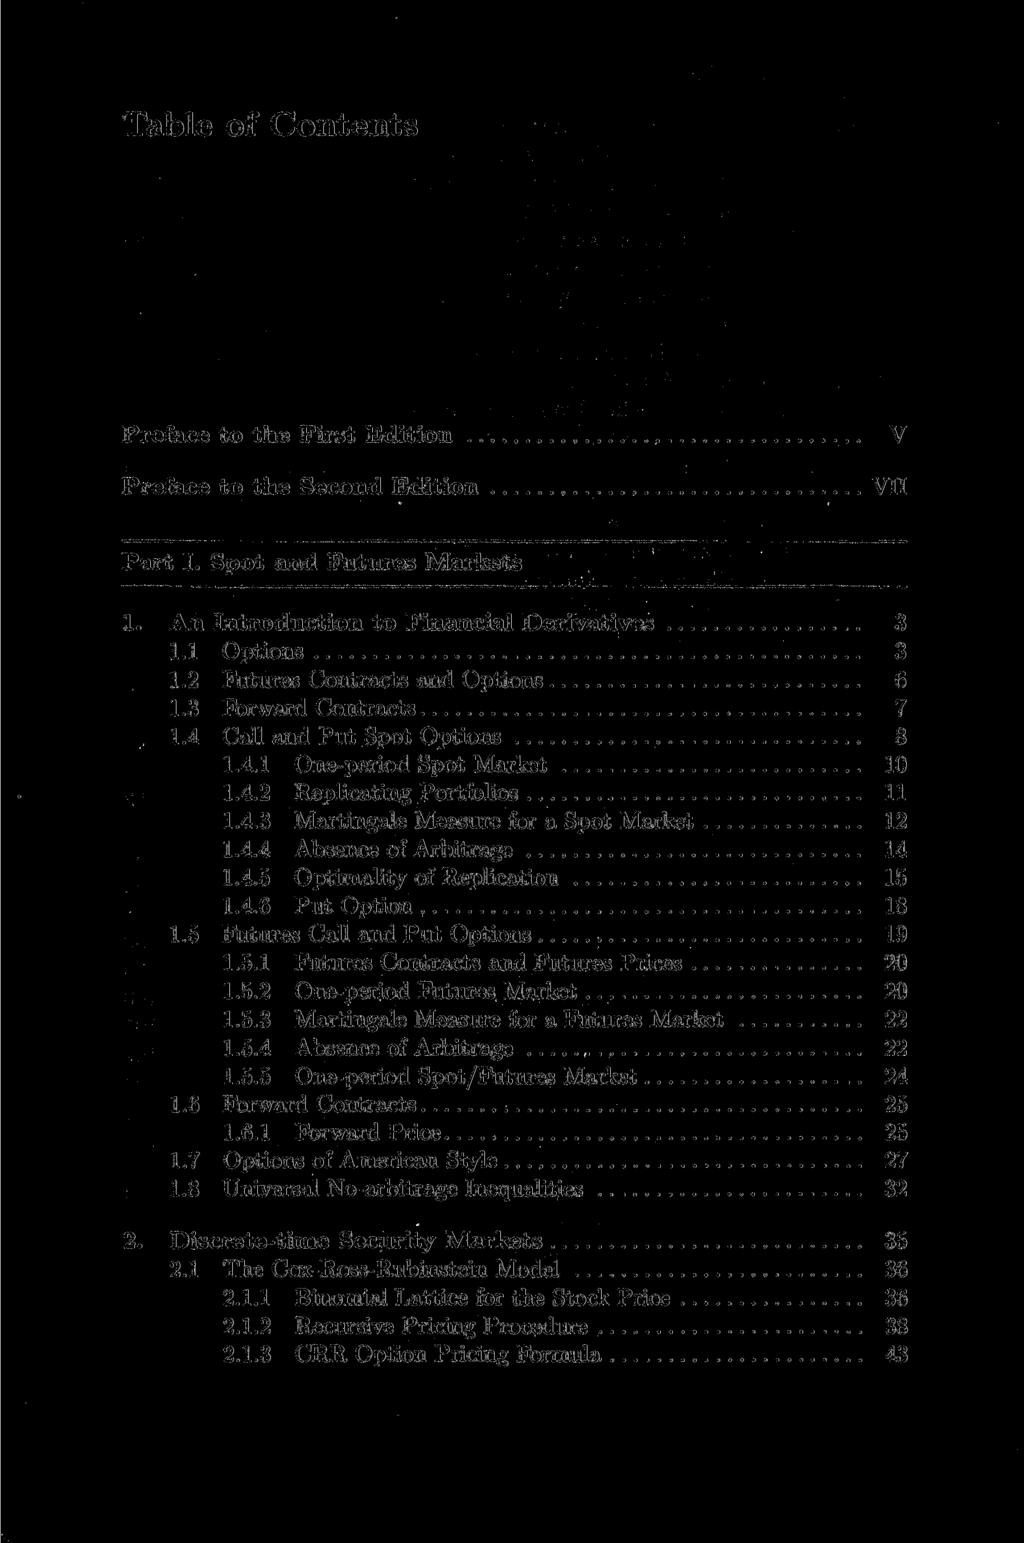 Table of Contents Preface to the First Edition Preface to the Second Edition V VII Part I. Spot and Futures Markets 1. An Introduction to Financial Derivatives 3 1.1 Options 3 1.